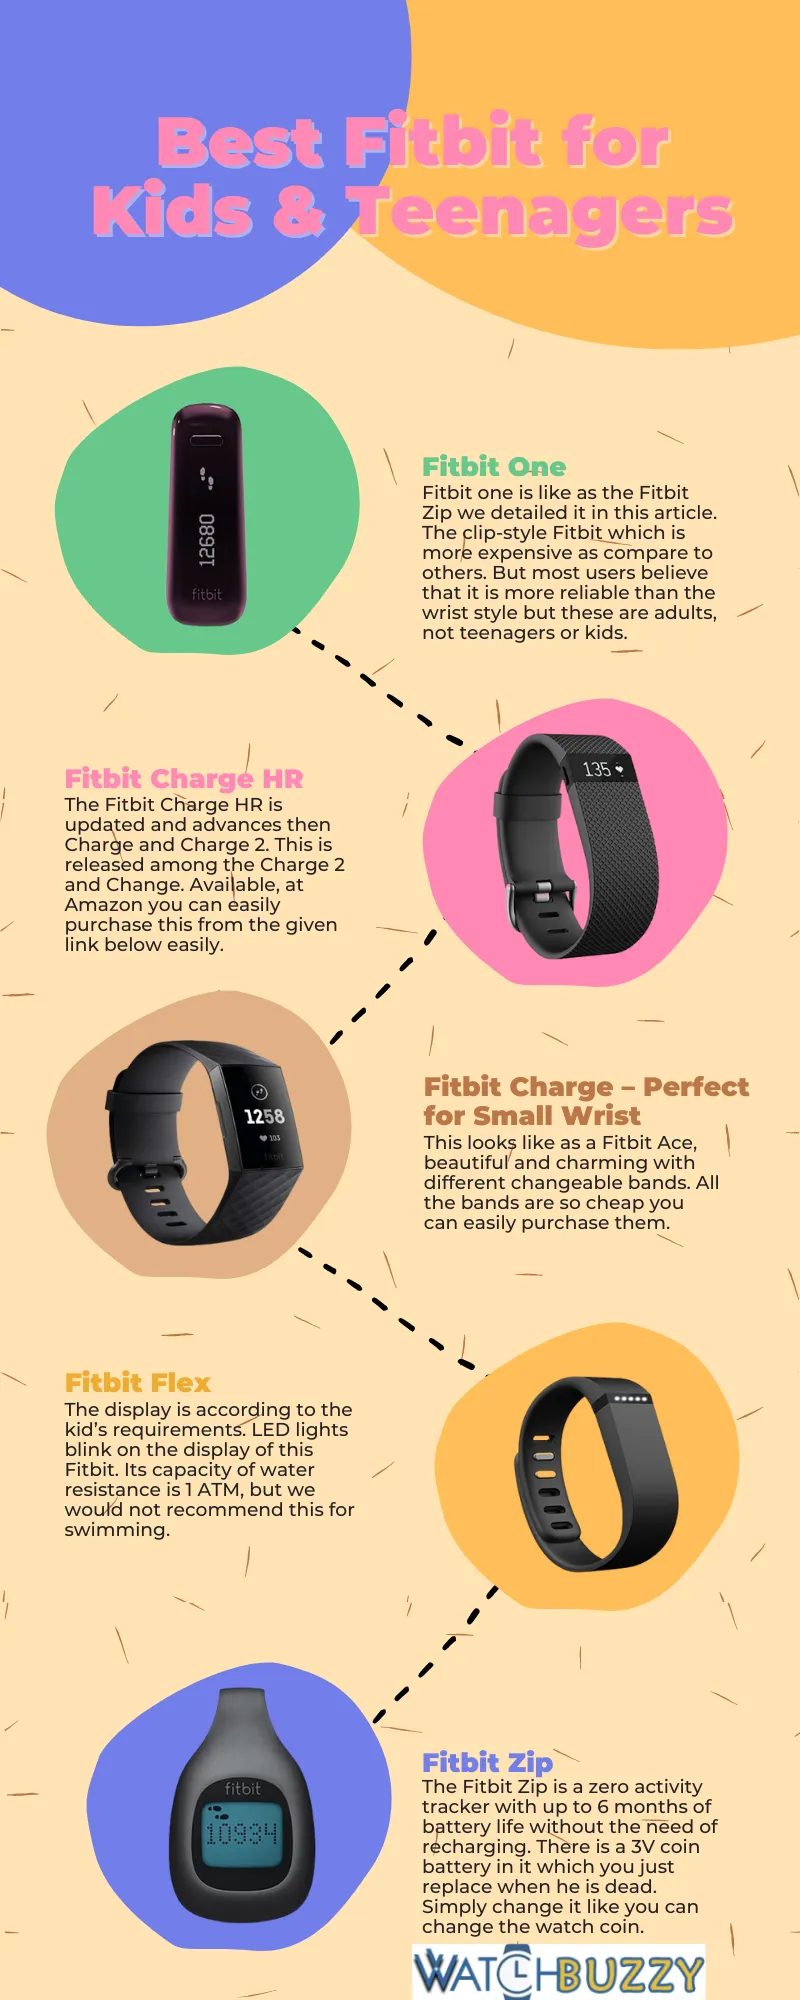 Best Fitbit for Kids & Teenagers